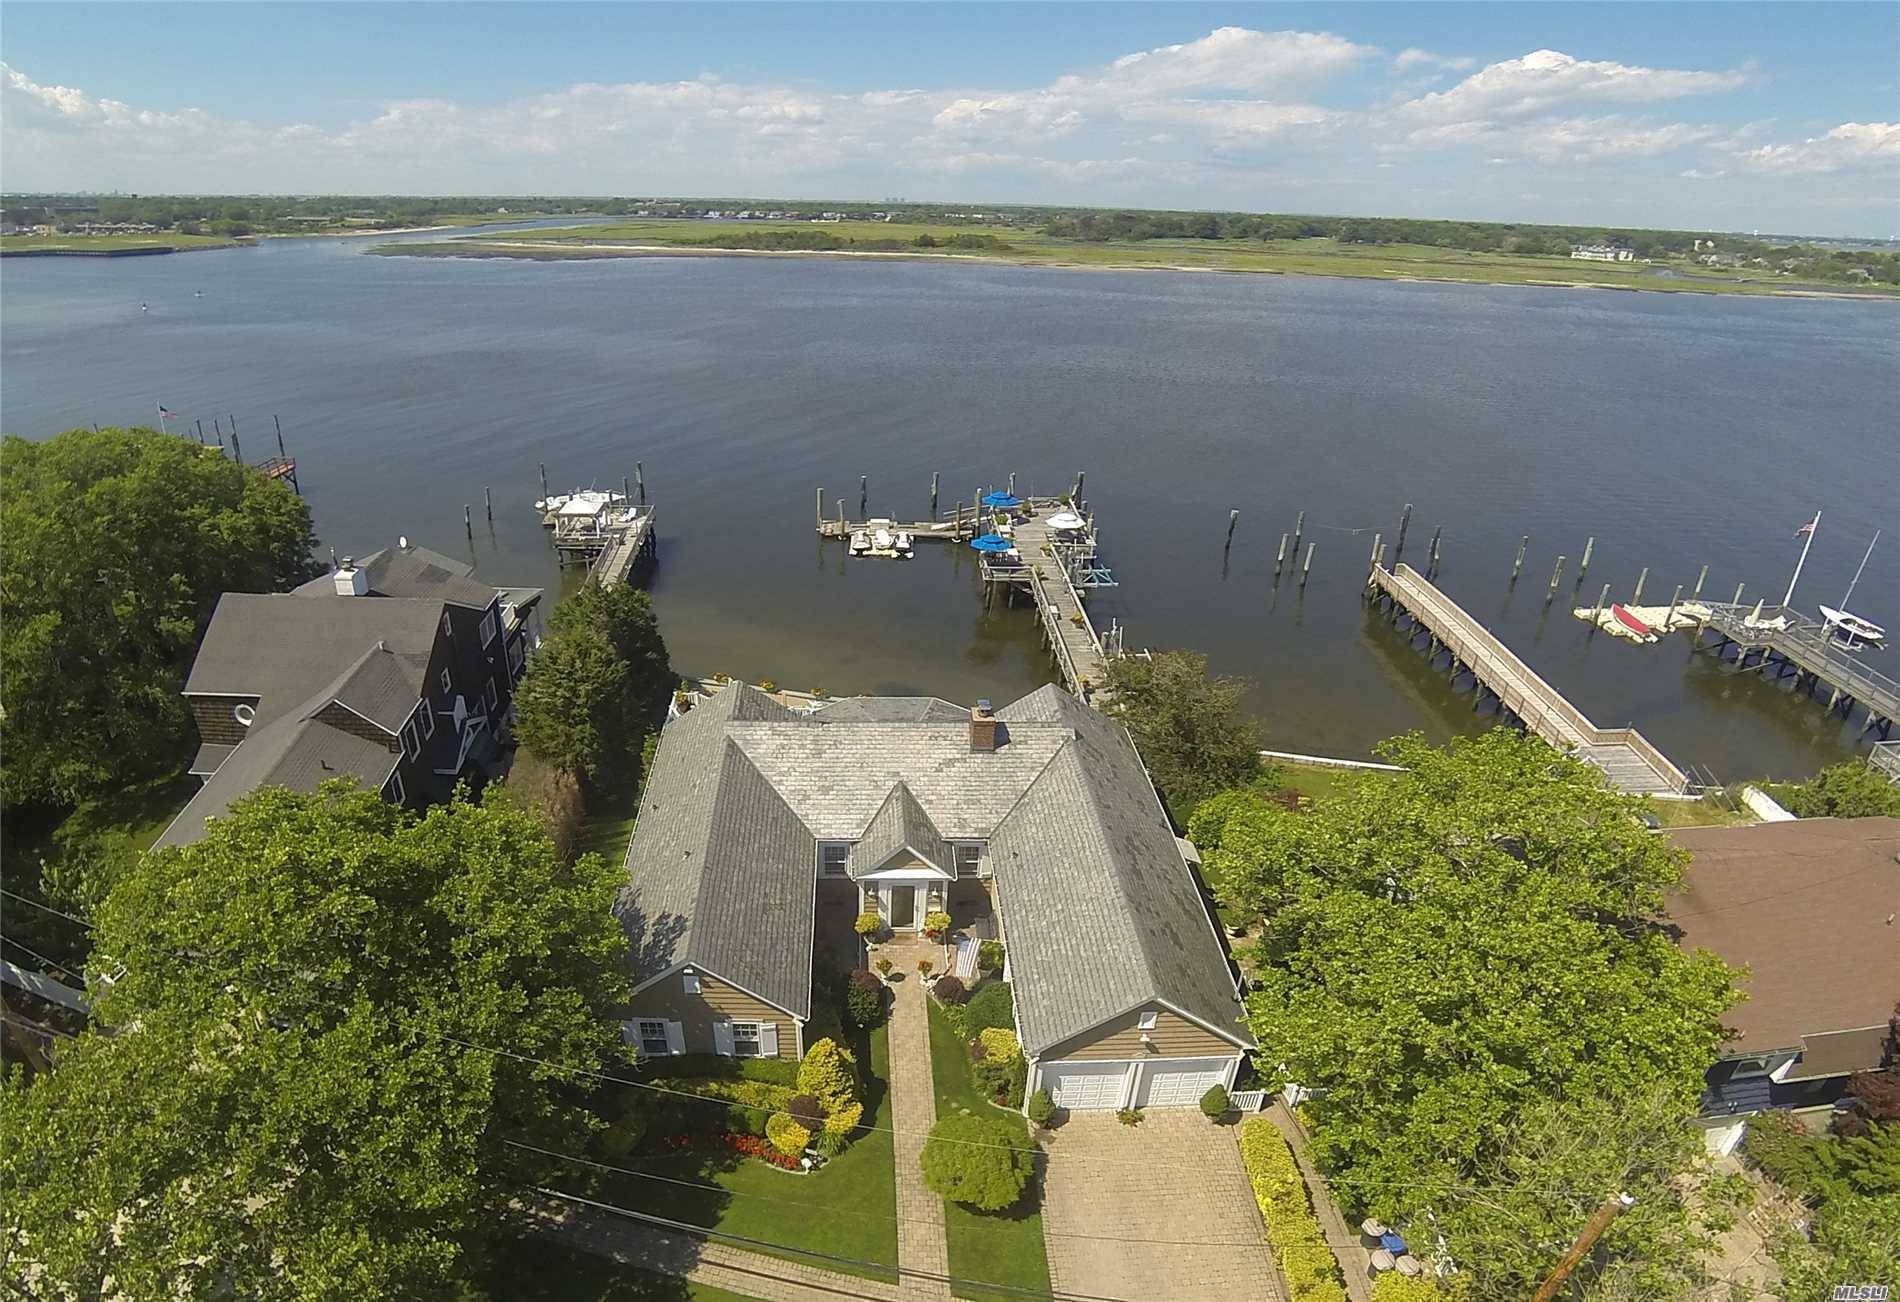 Newly Offered Timeless Waterfront 4 Bedroom, 4 Bath Home Situated On Over 8500 Sq.